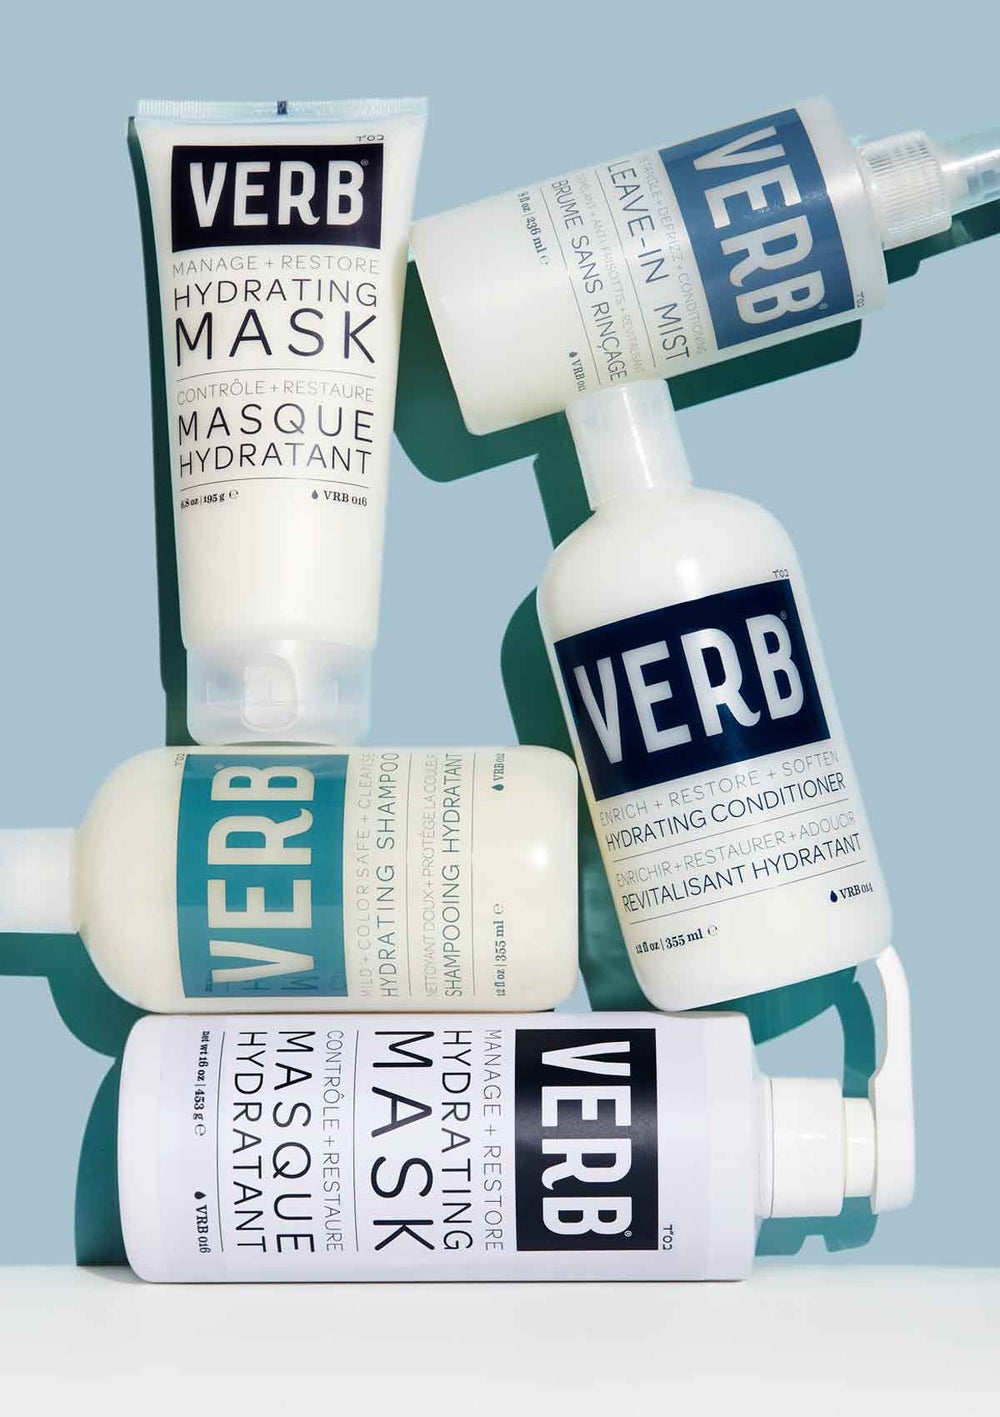 Verb - Hydrating Mask Manage + Restore |16 oz| - by Verb |ProCare Outlet|